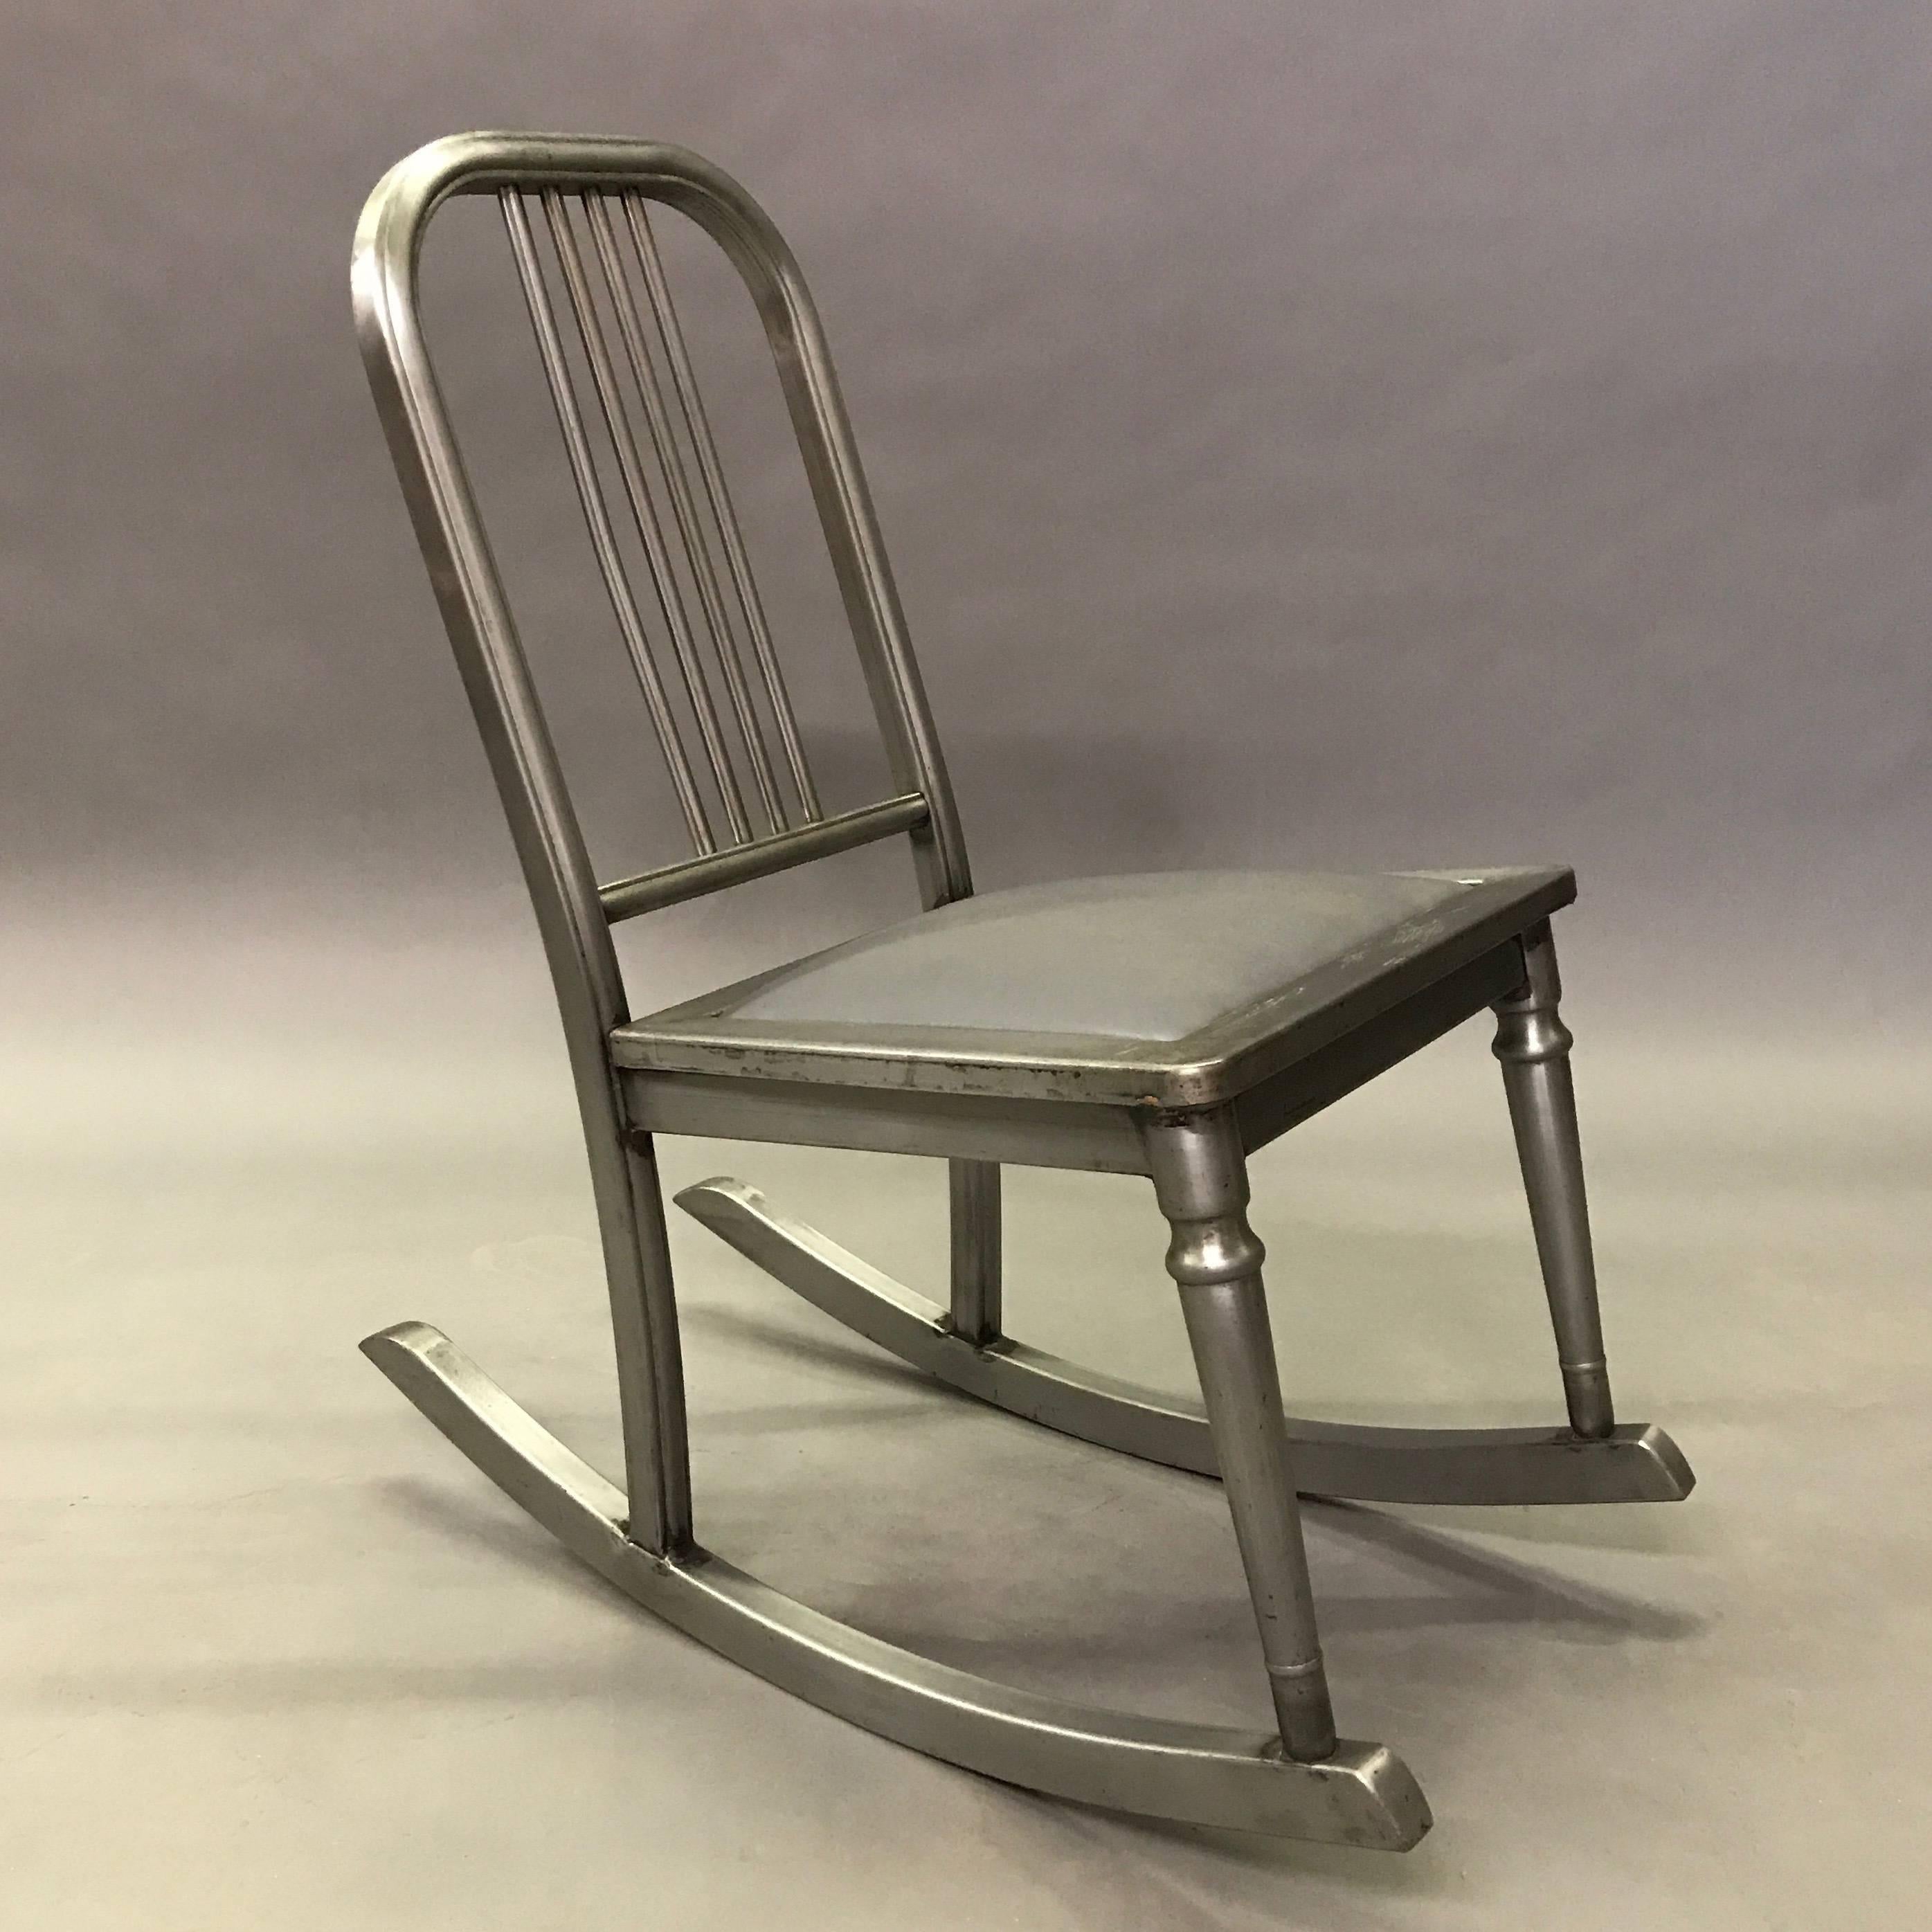 Petite, Industrial, brushed steel rocking chair with upholstered gunmetal vinyl seat is from the Sheraton Series by Simmons Company Furniture, circa 1920s.